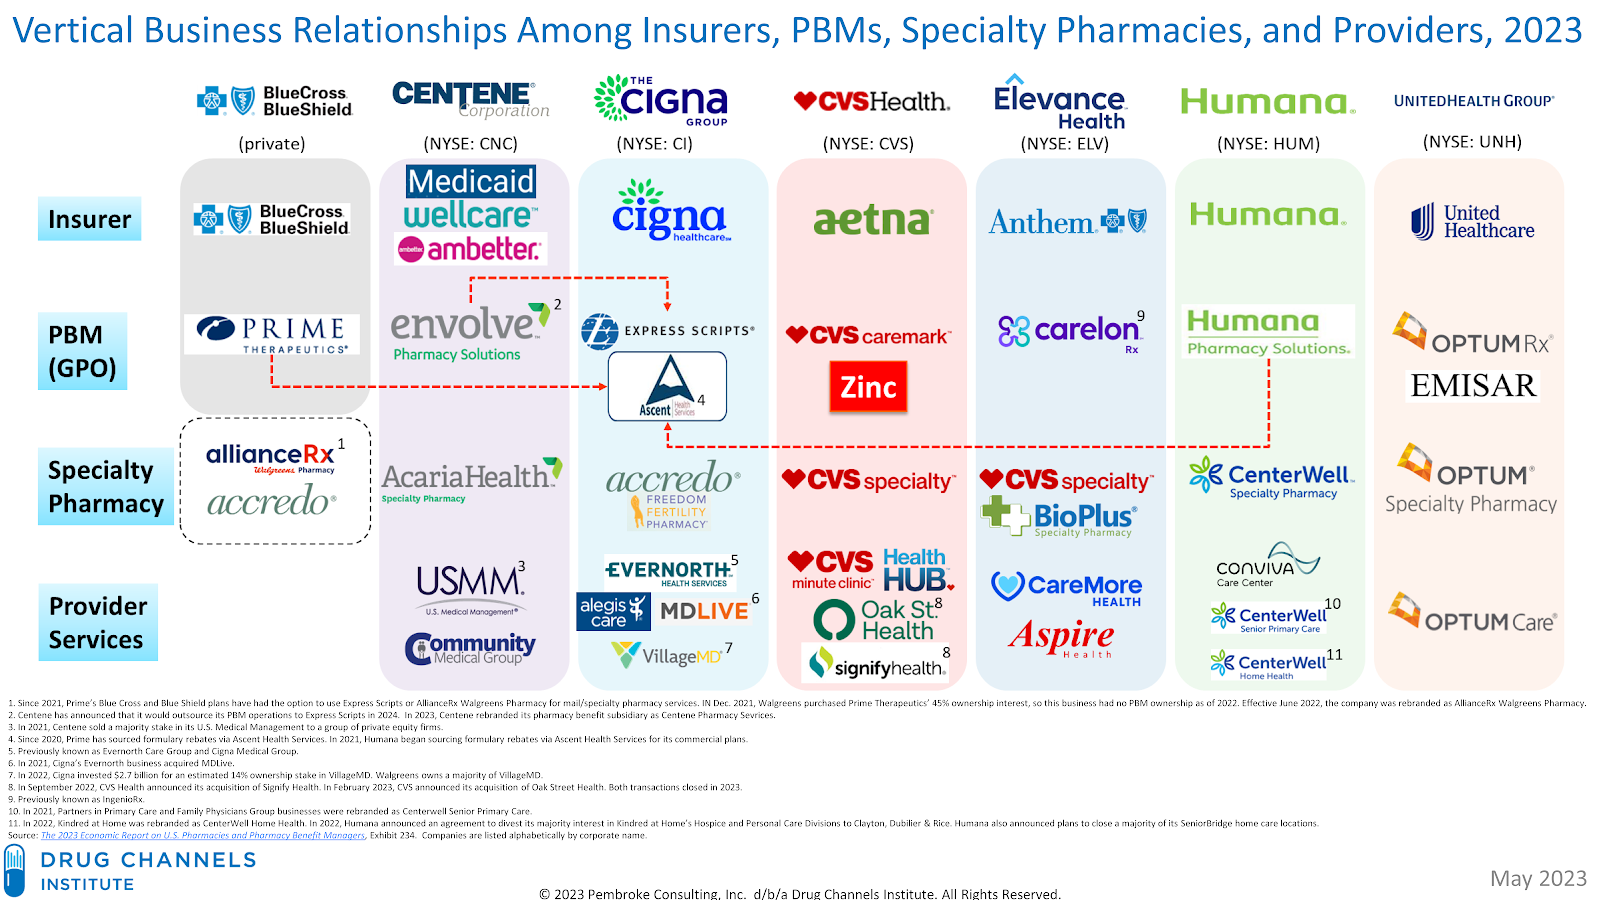 Mapping the Vertical Integration of Insurers, PBMs, Specialty